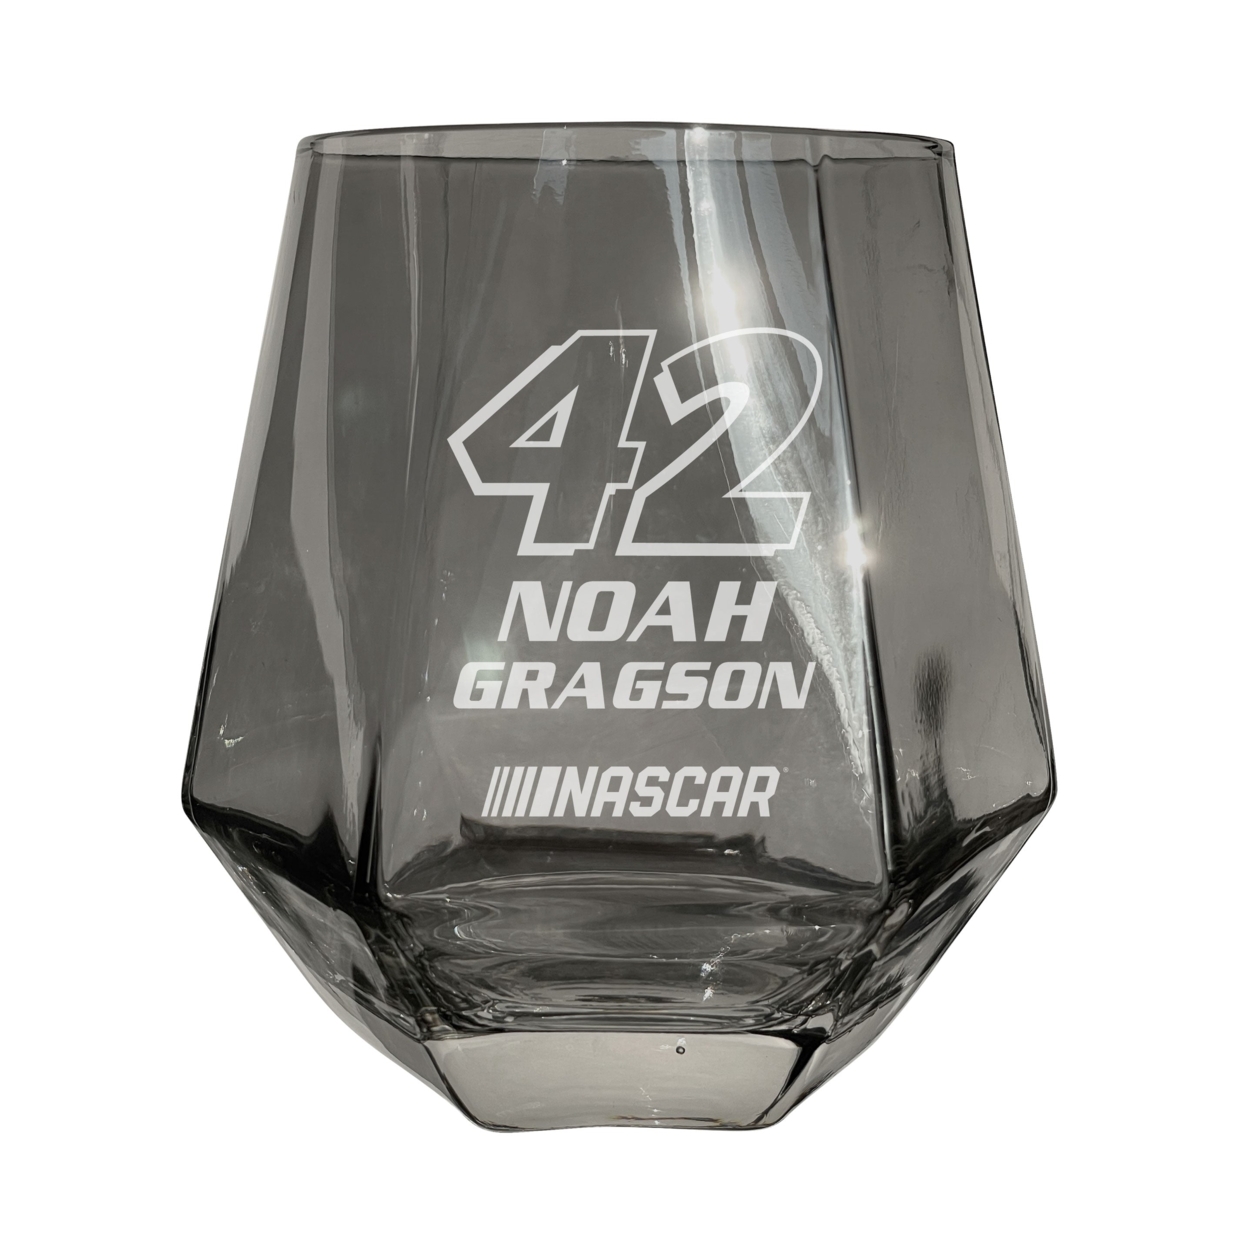 #42 Noah Gragson Officially Licensed 10 Oz Engraved Diamond Wine Glass - Iridescent, 2-Pack